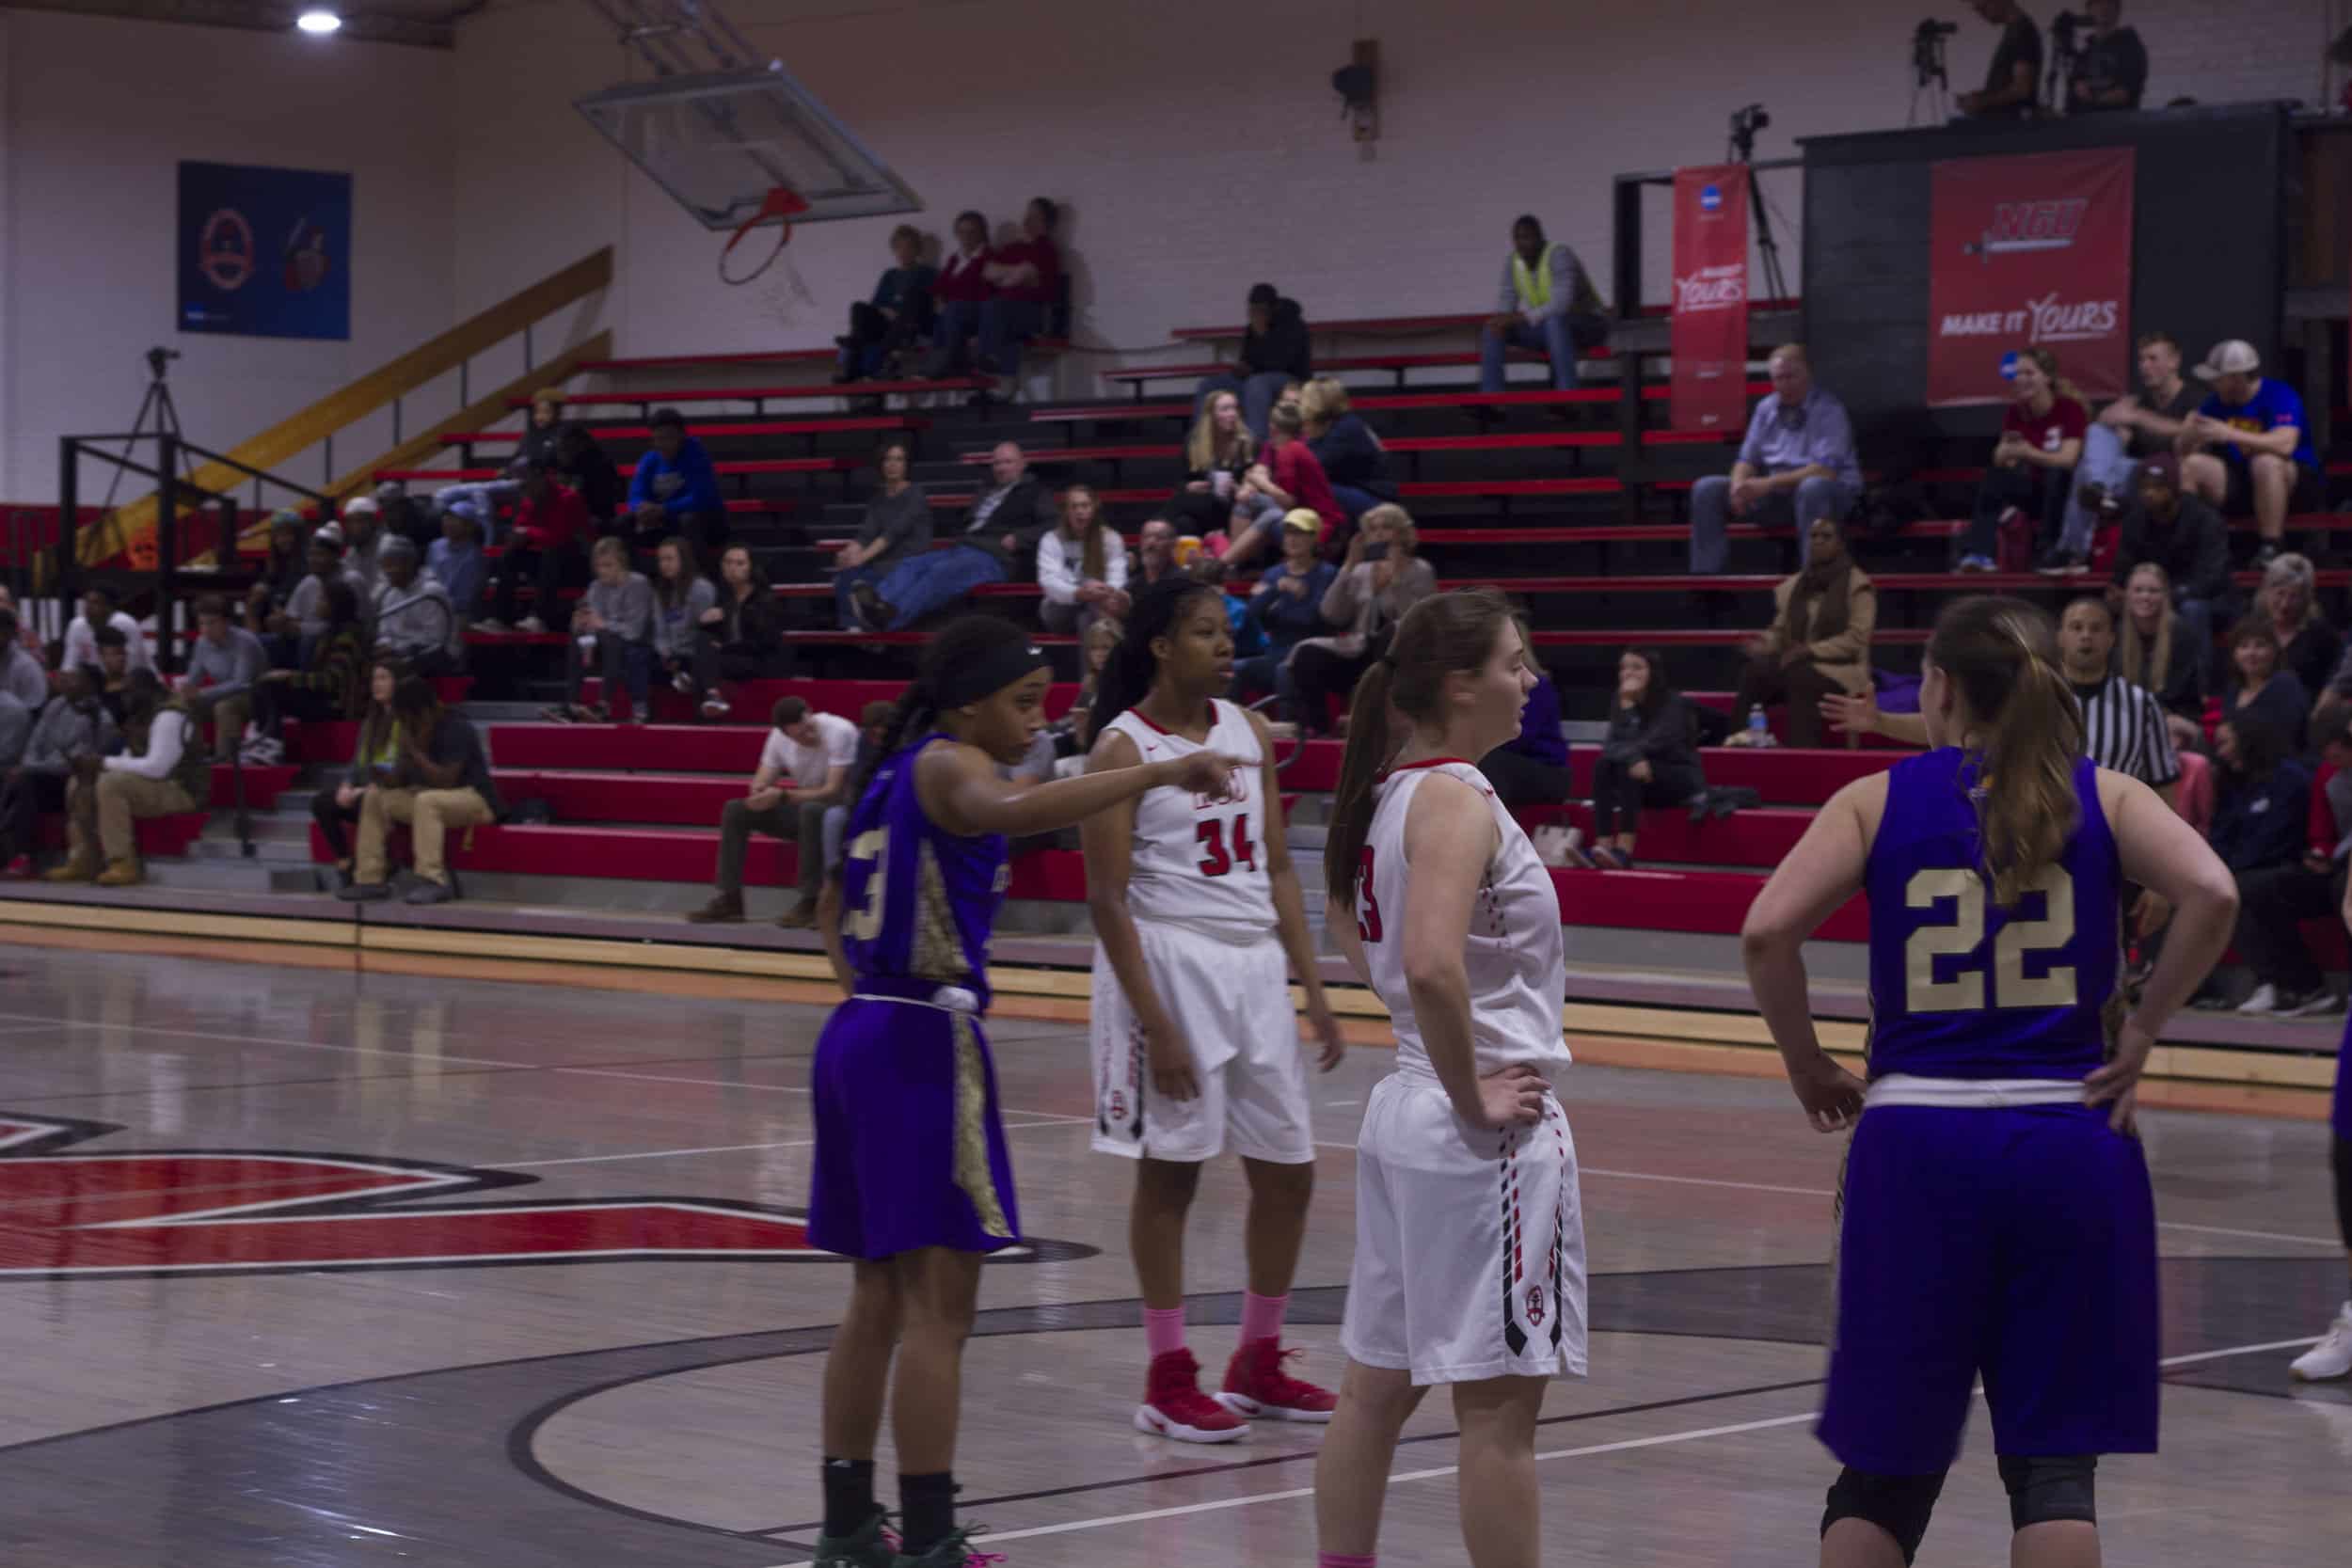 Senior forward, Alicia Jones (34), lines up to shoot a pair of free throws.